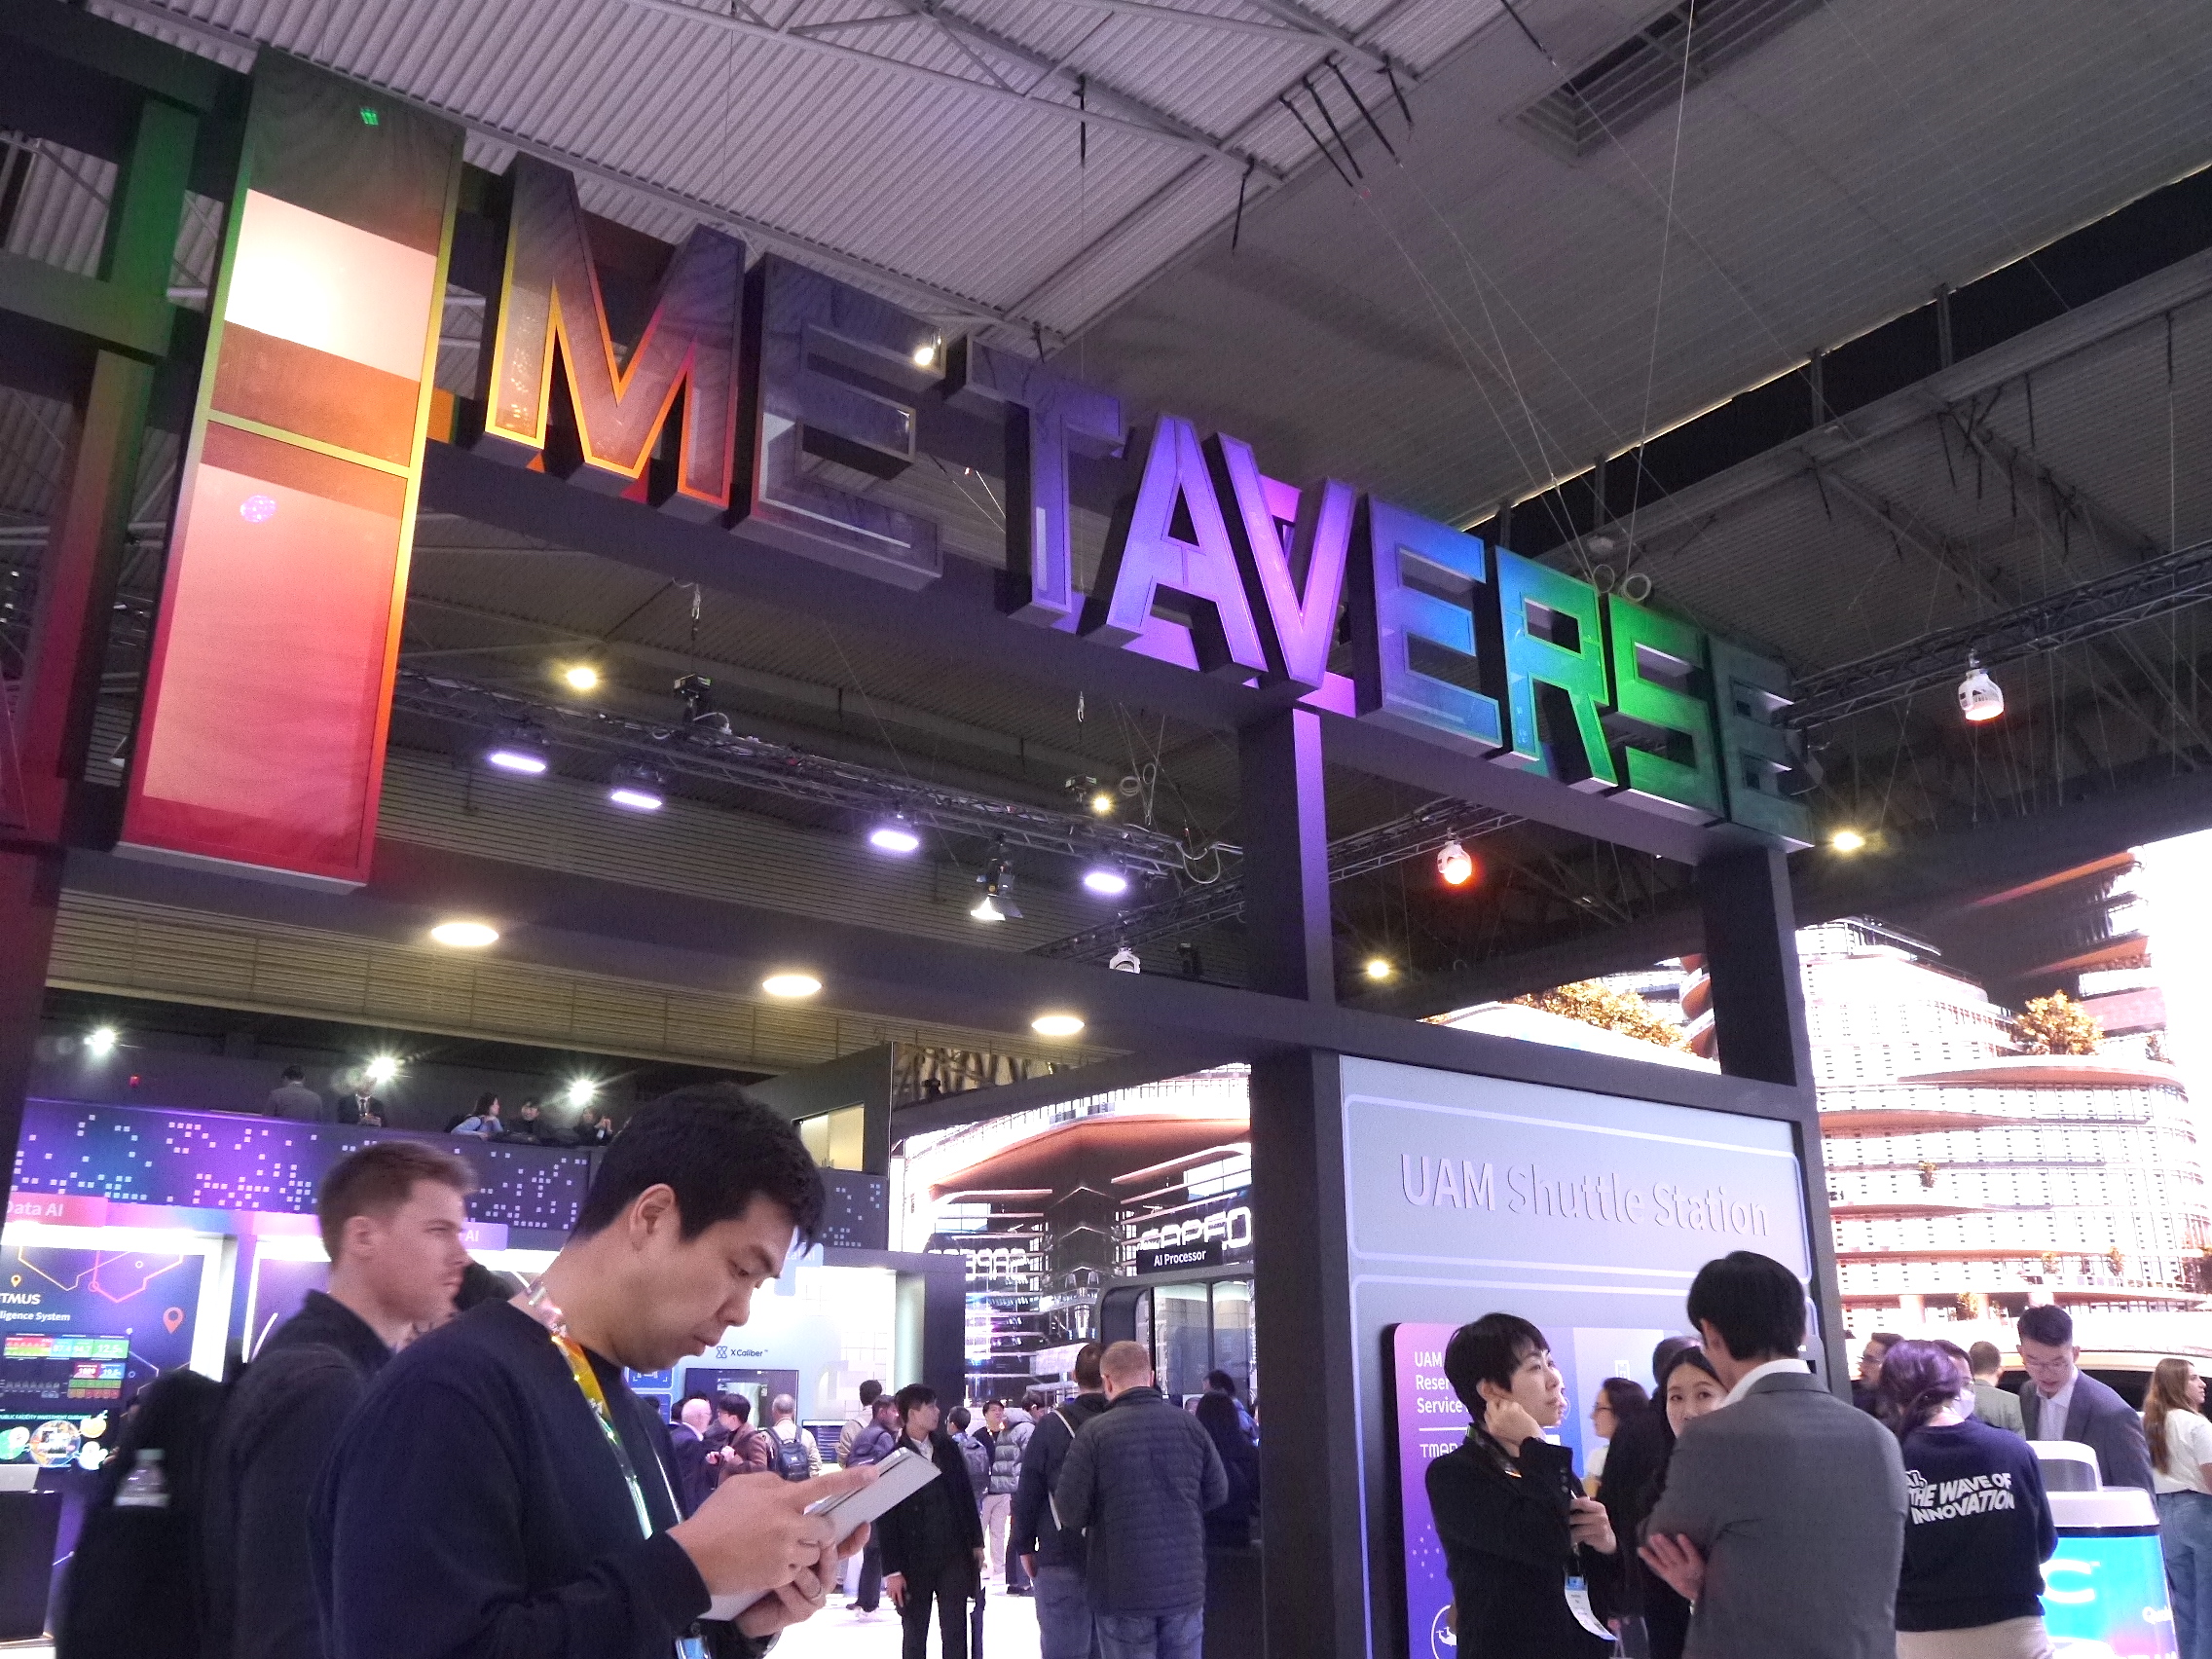 A colorful 'Metaverse' logo is displayed above a stand at the MWC 2023 trade show in Barcelona